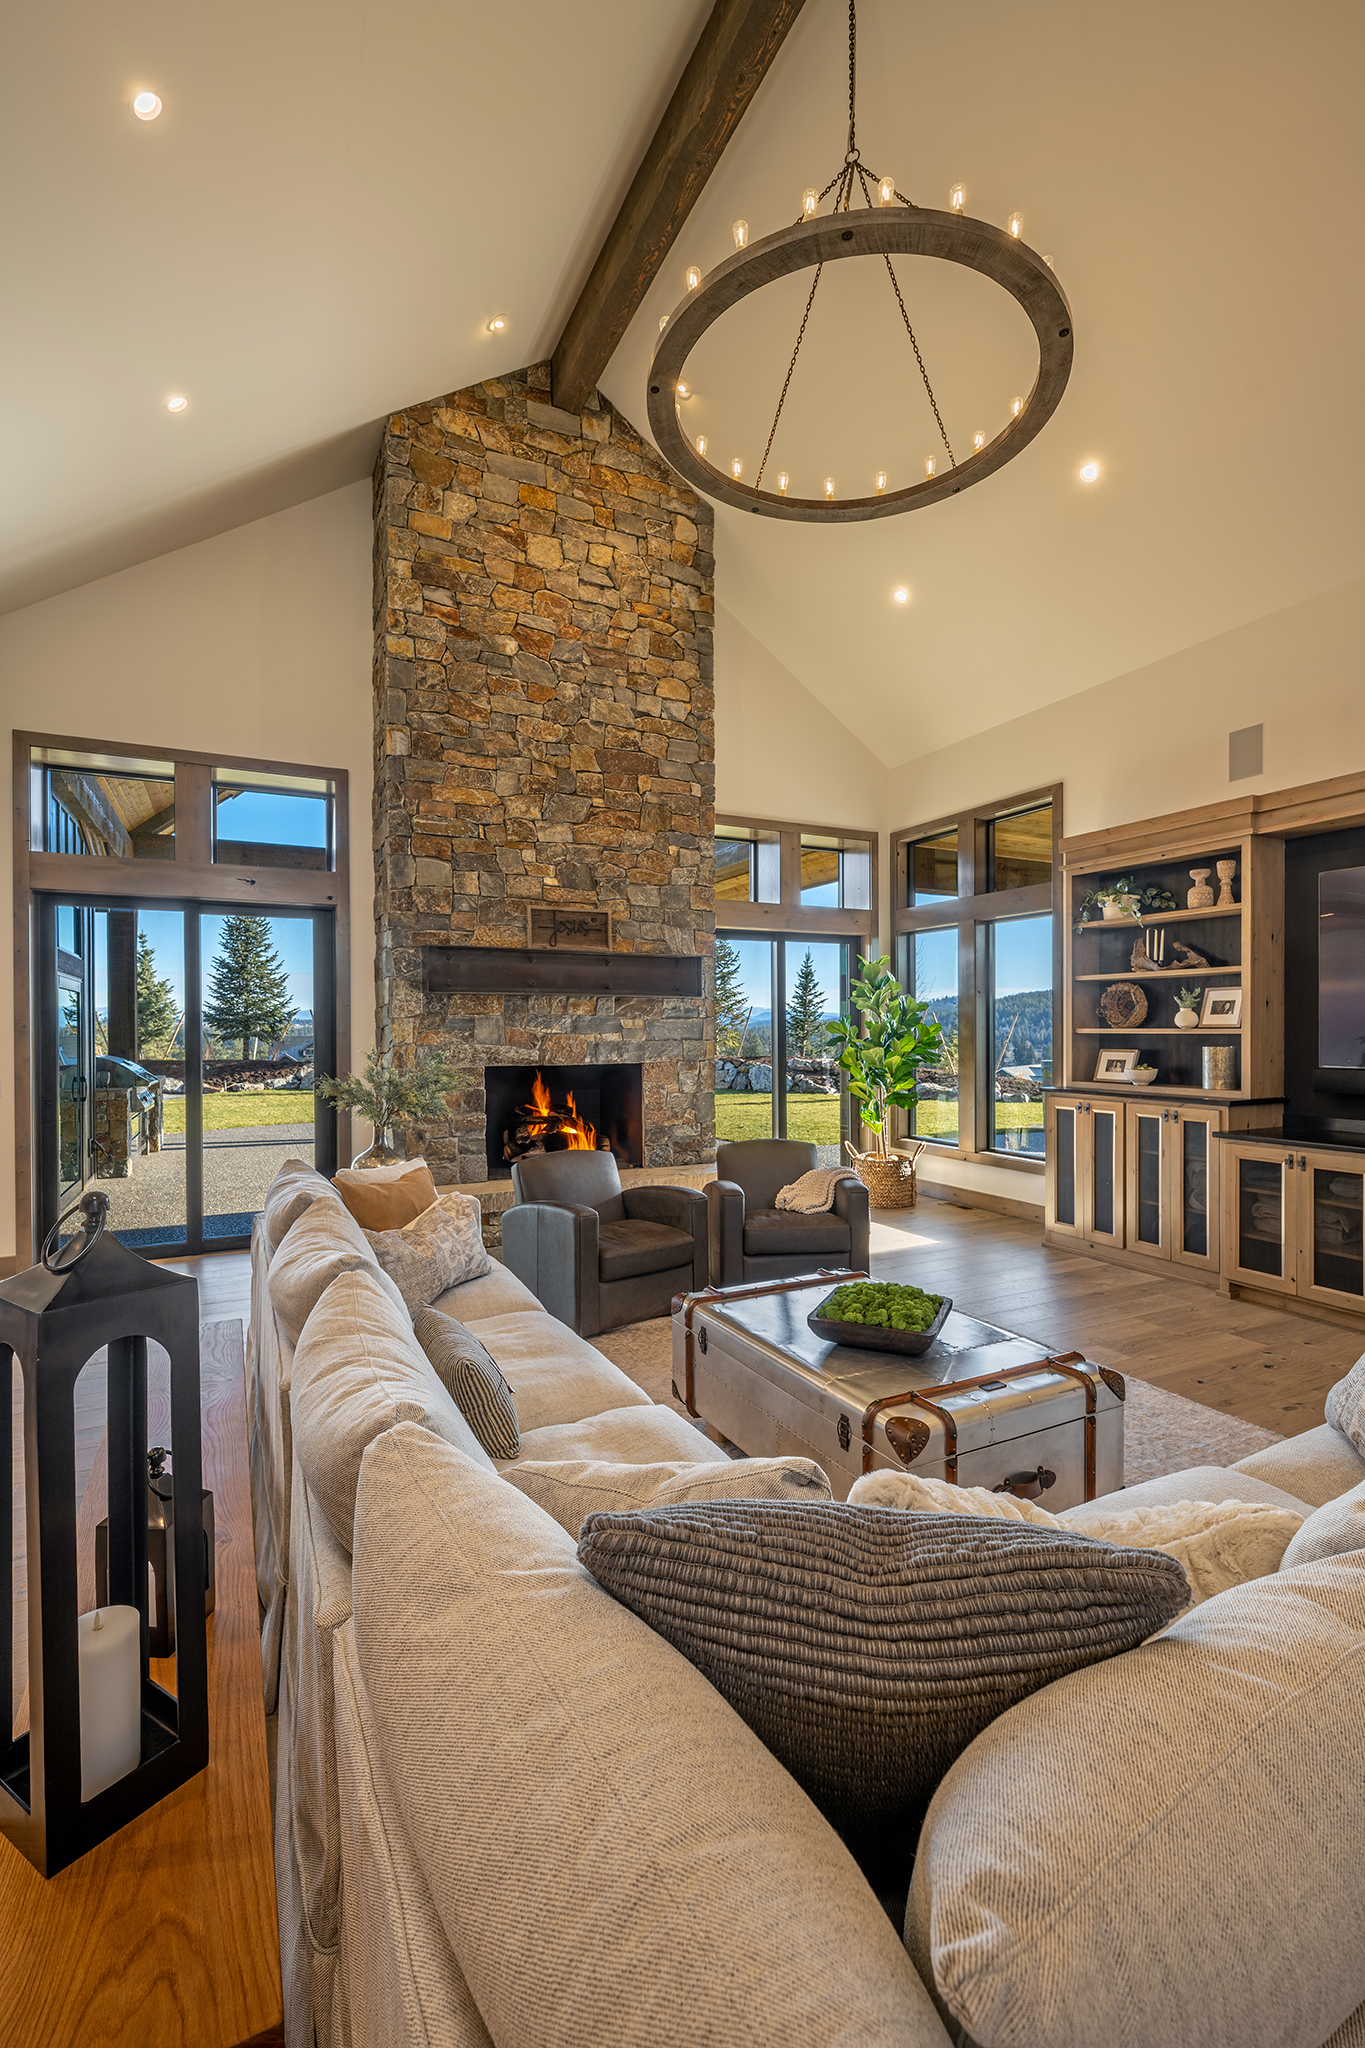 The stone fireplace is the centerpiece of the great room.